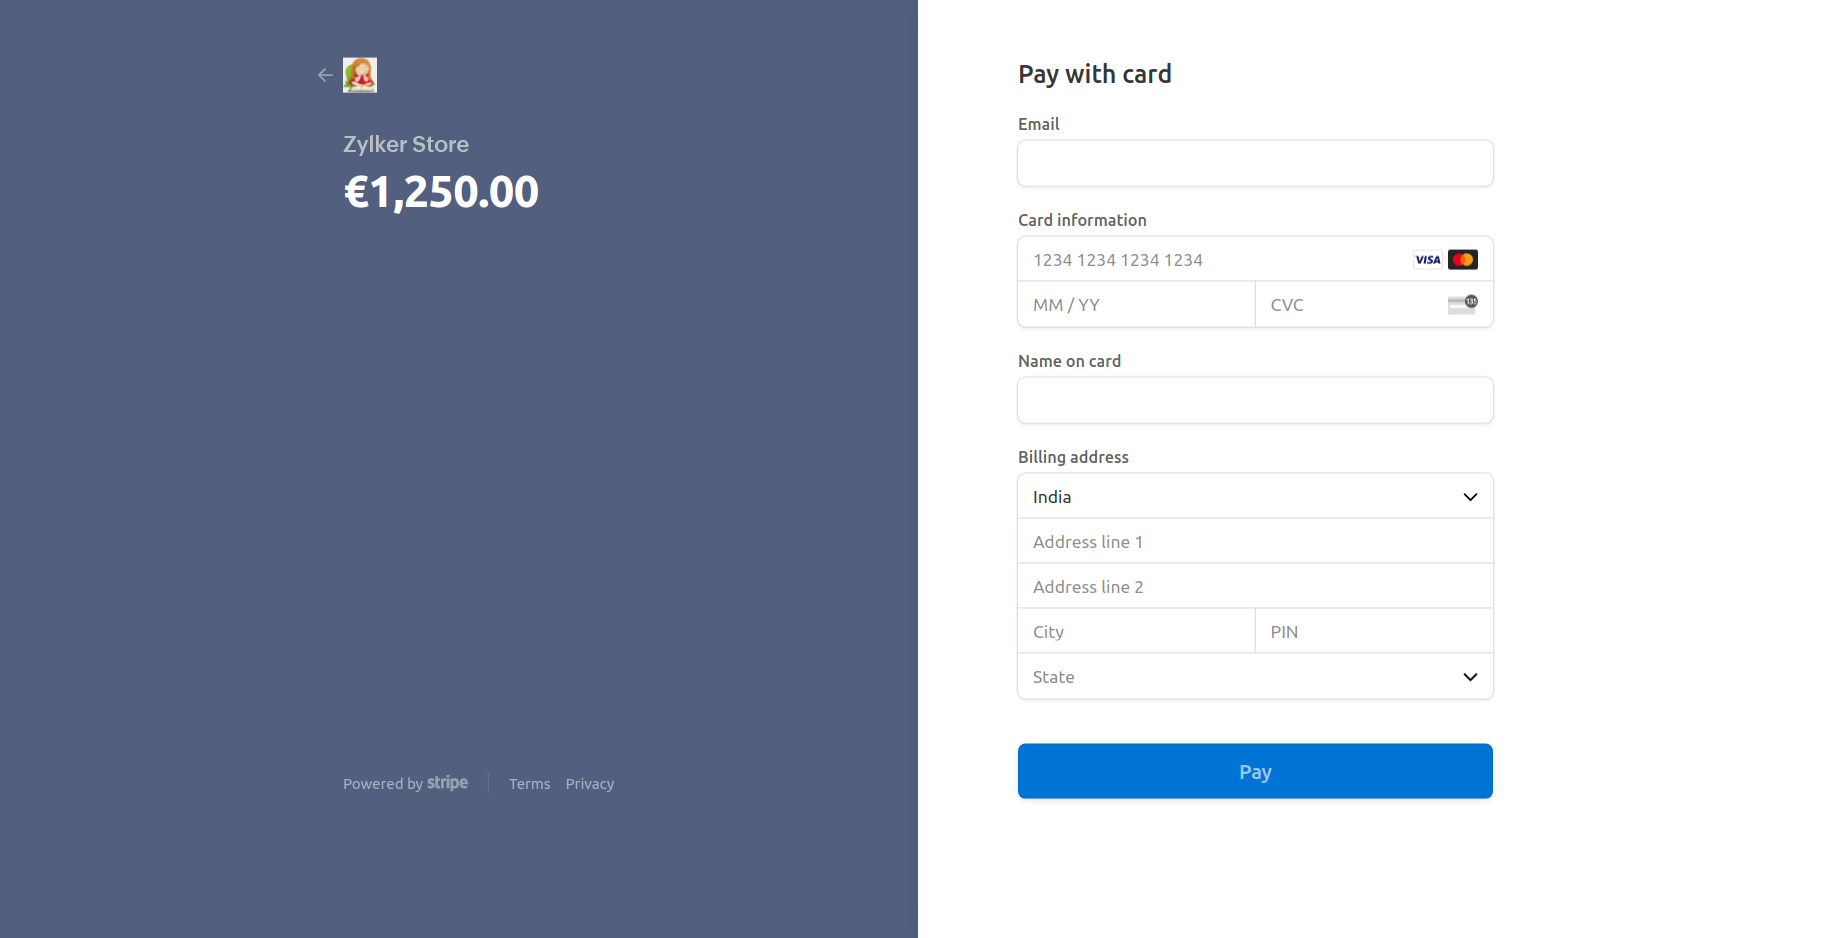 How Product Name is displayed while making payment